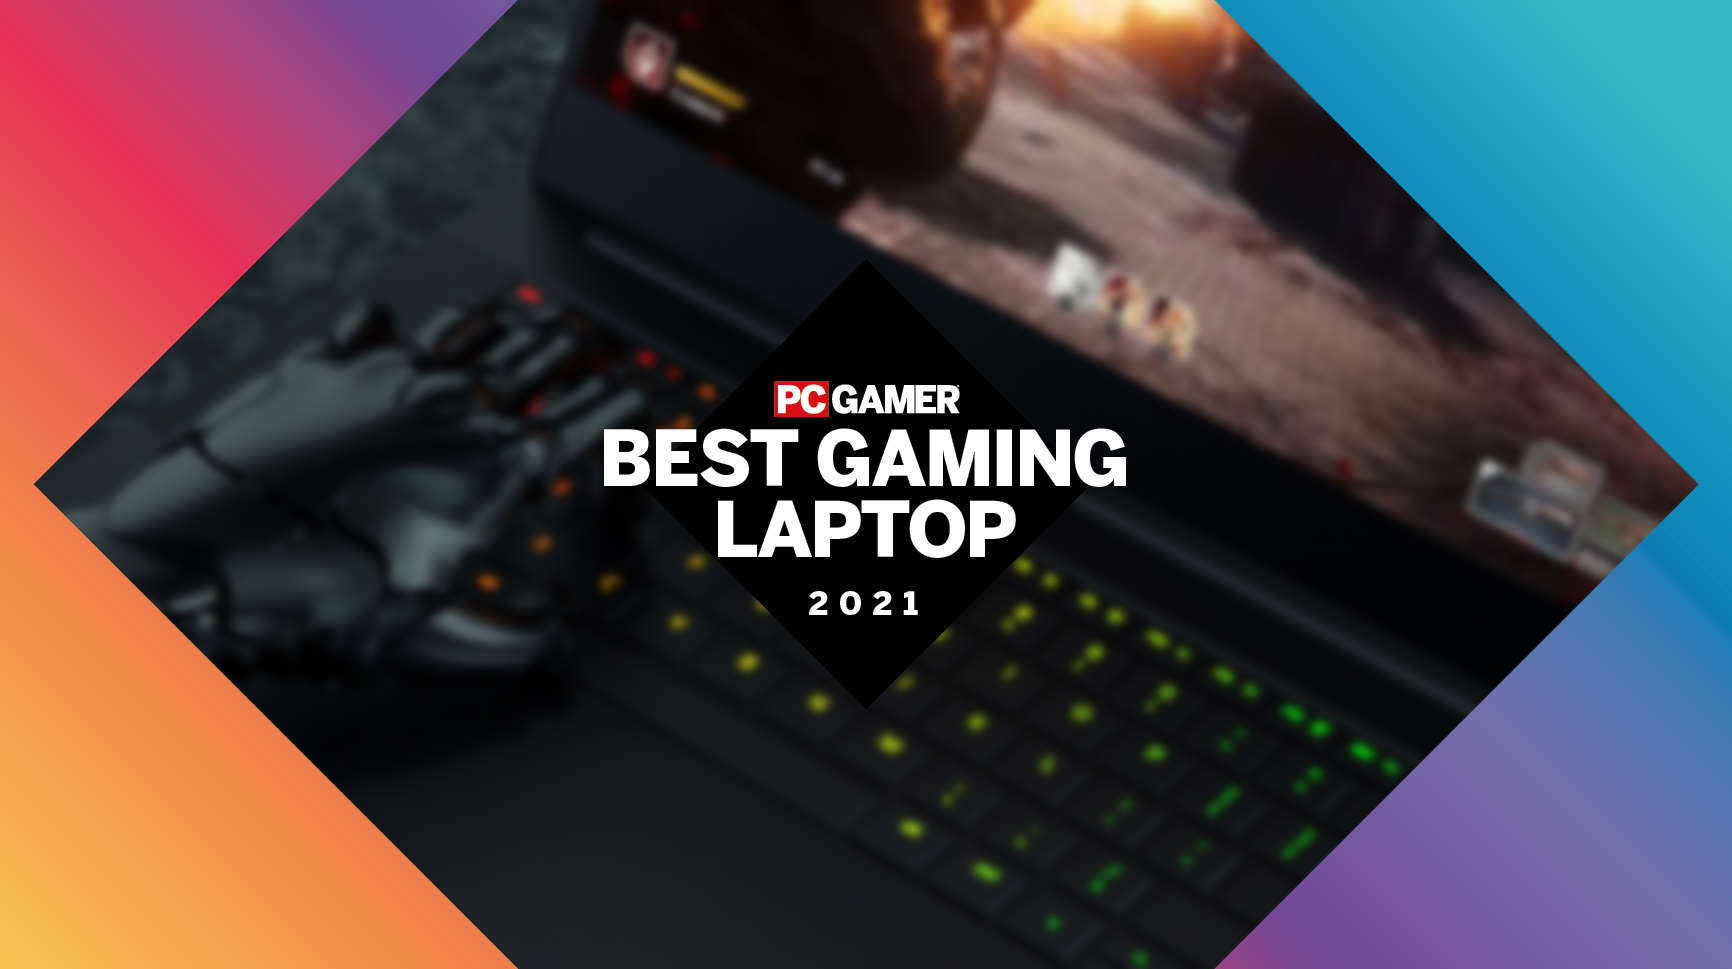  PC Gamer Hardware Awards: What is the best gaming laptop of 2021? 